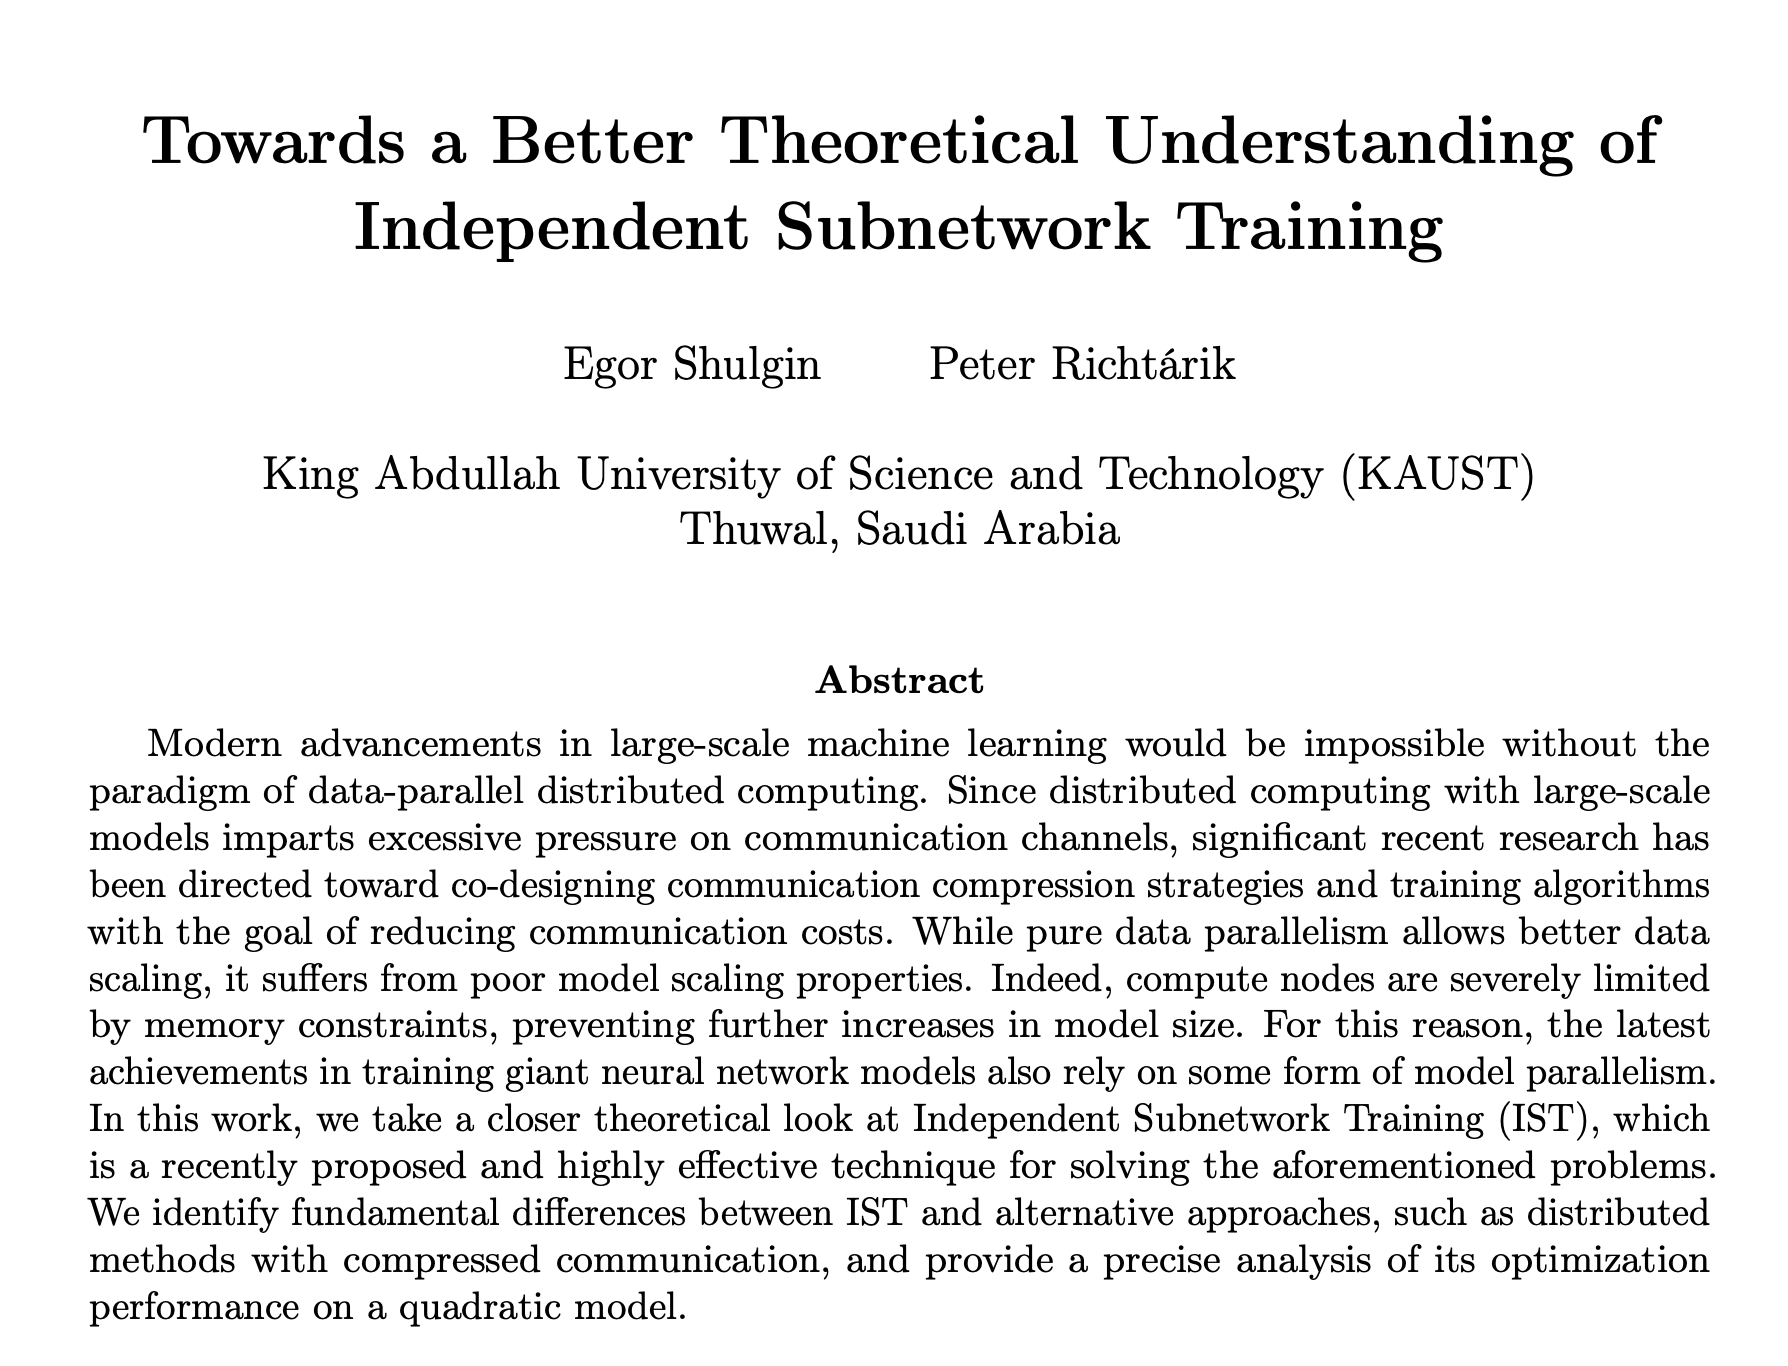 Towards a Better Theoretical Understanding of Independent Subnetwork Training